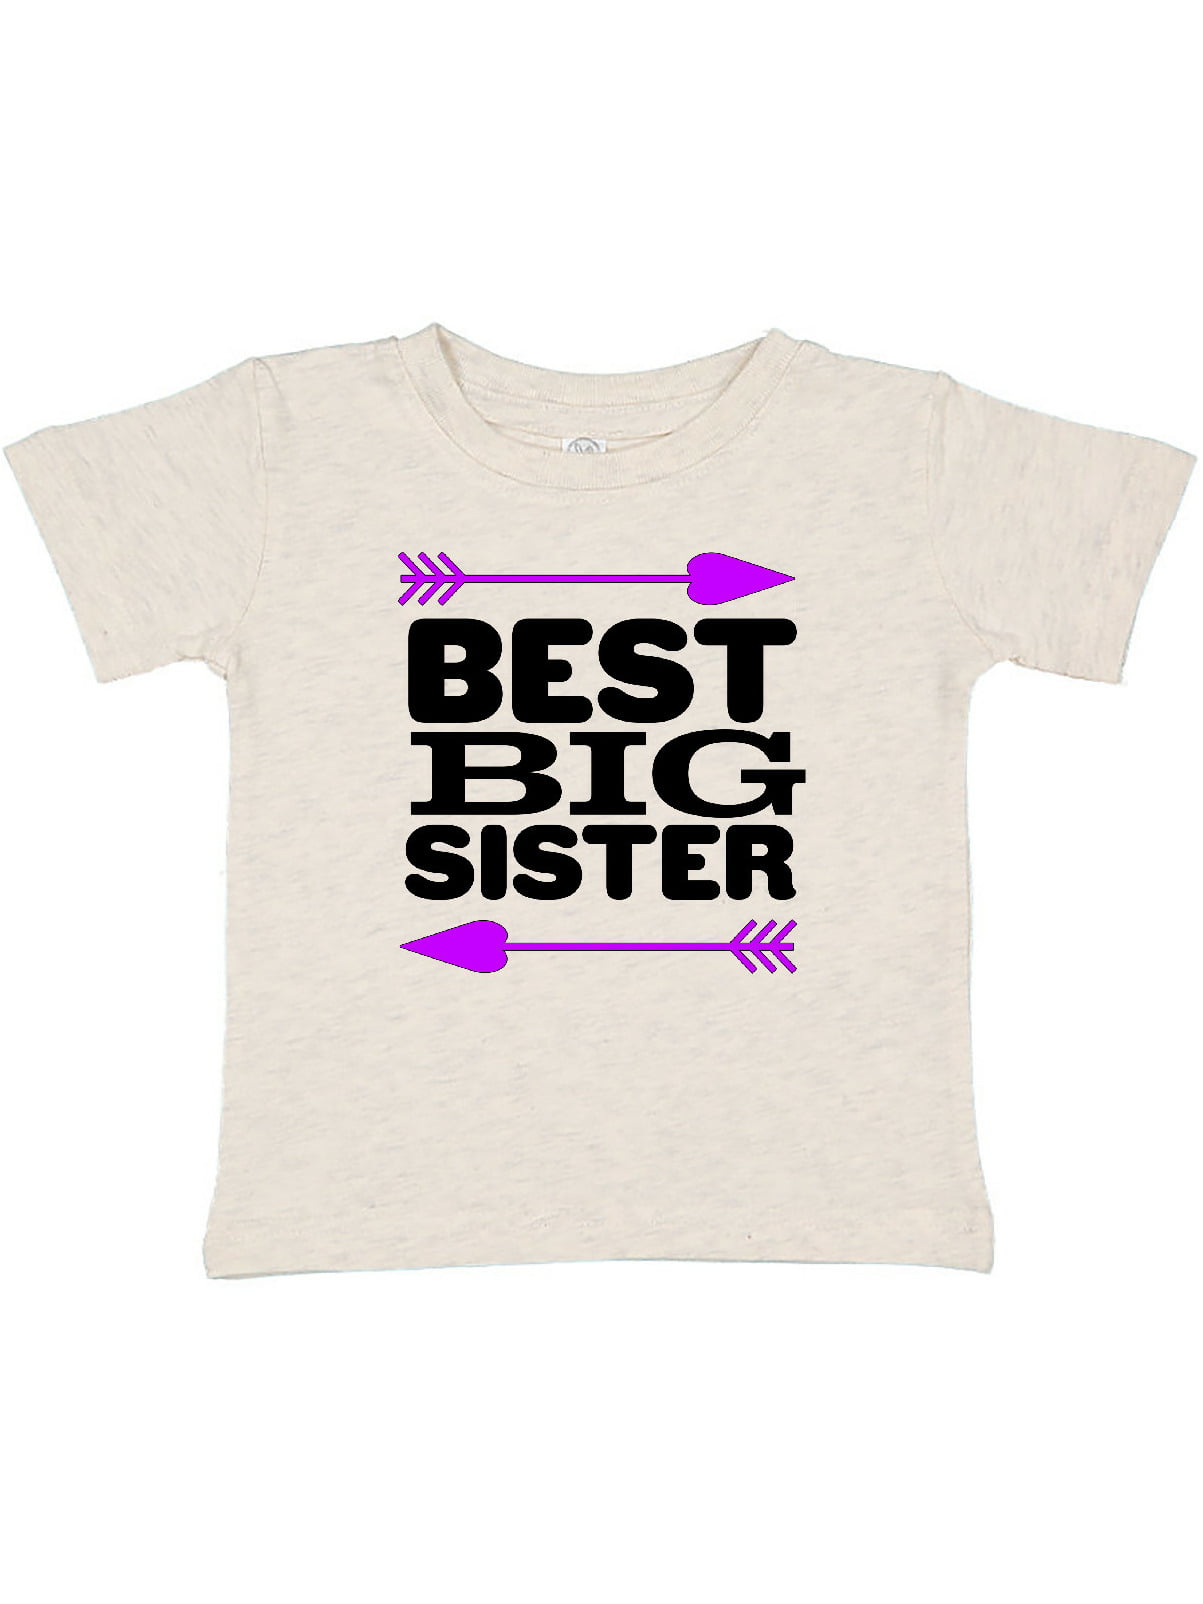 ~NEW "BEST BIG SISTER" Baby Girls Graphic Shirt 18-24 Months 2T 3T 4T 5T Gift! 